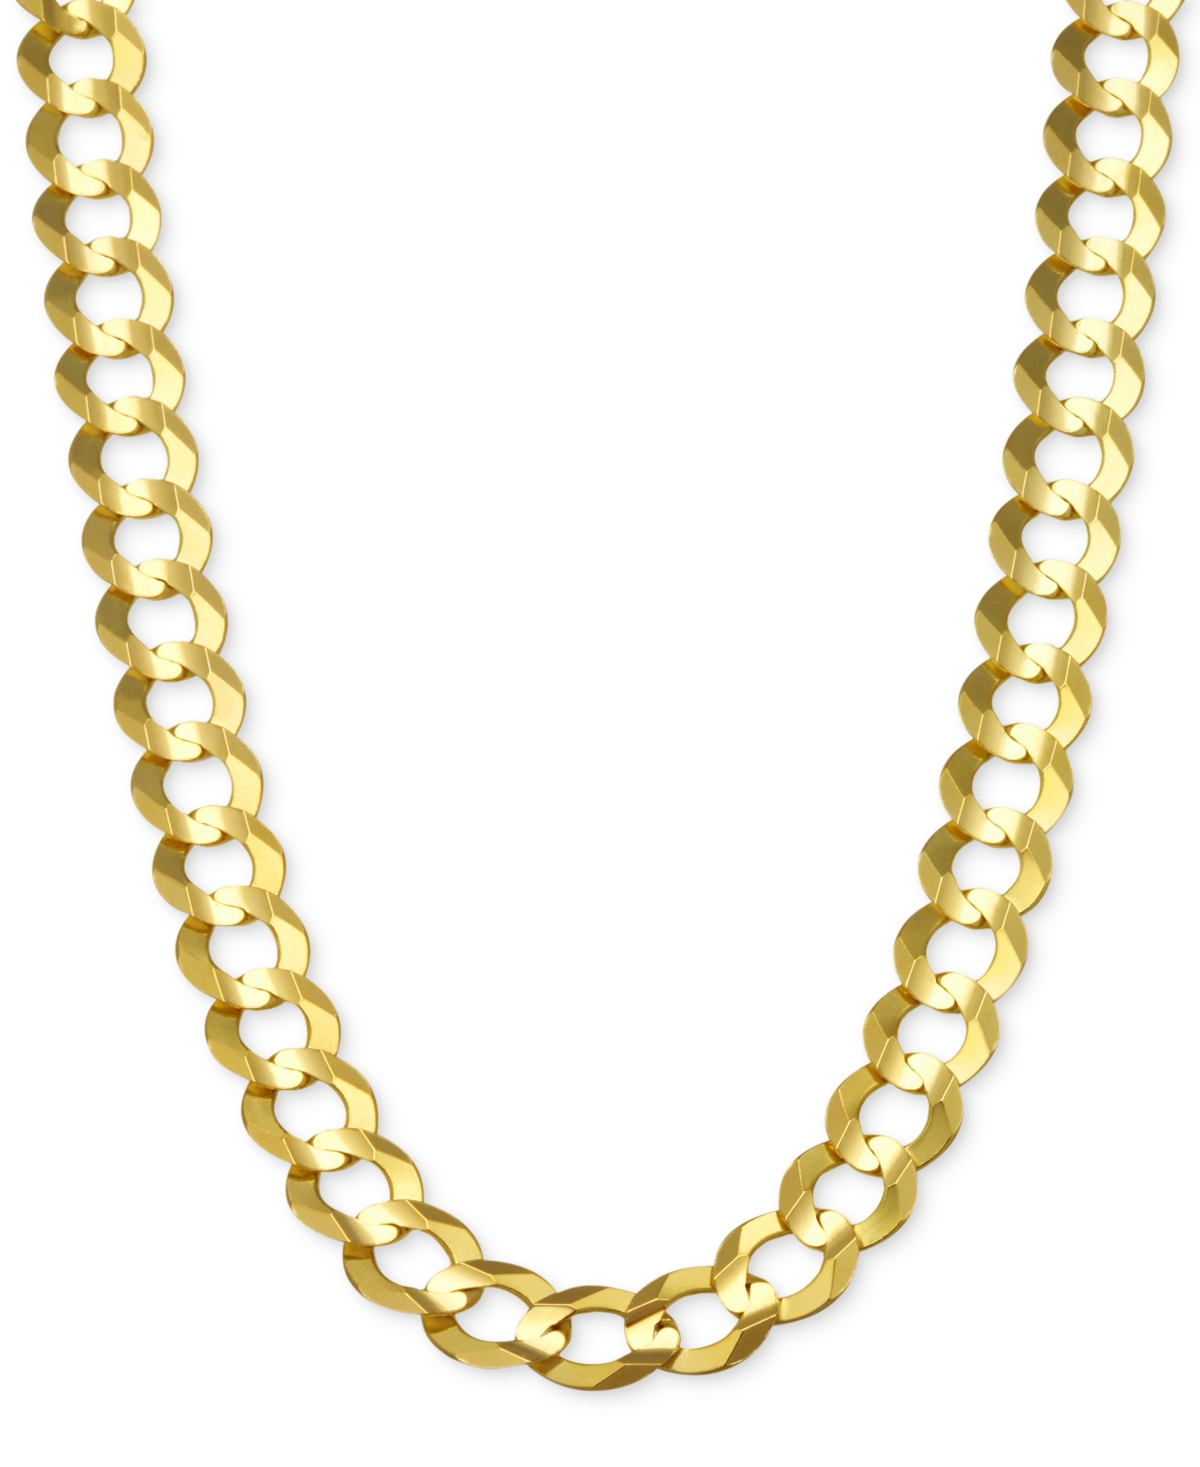 Italian Gold 30" Open Curb Link Chain Necklace (7mm) In Solid 14k Gold